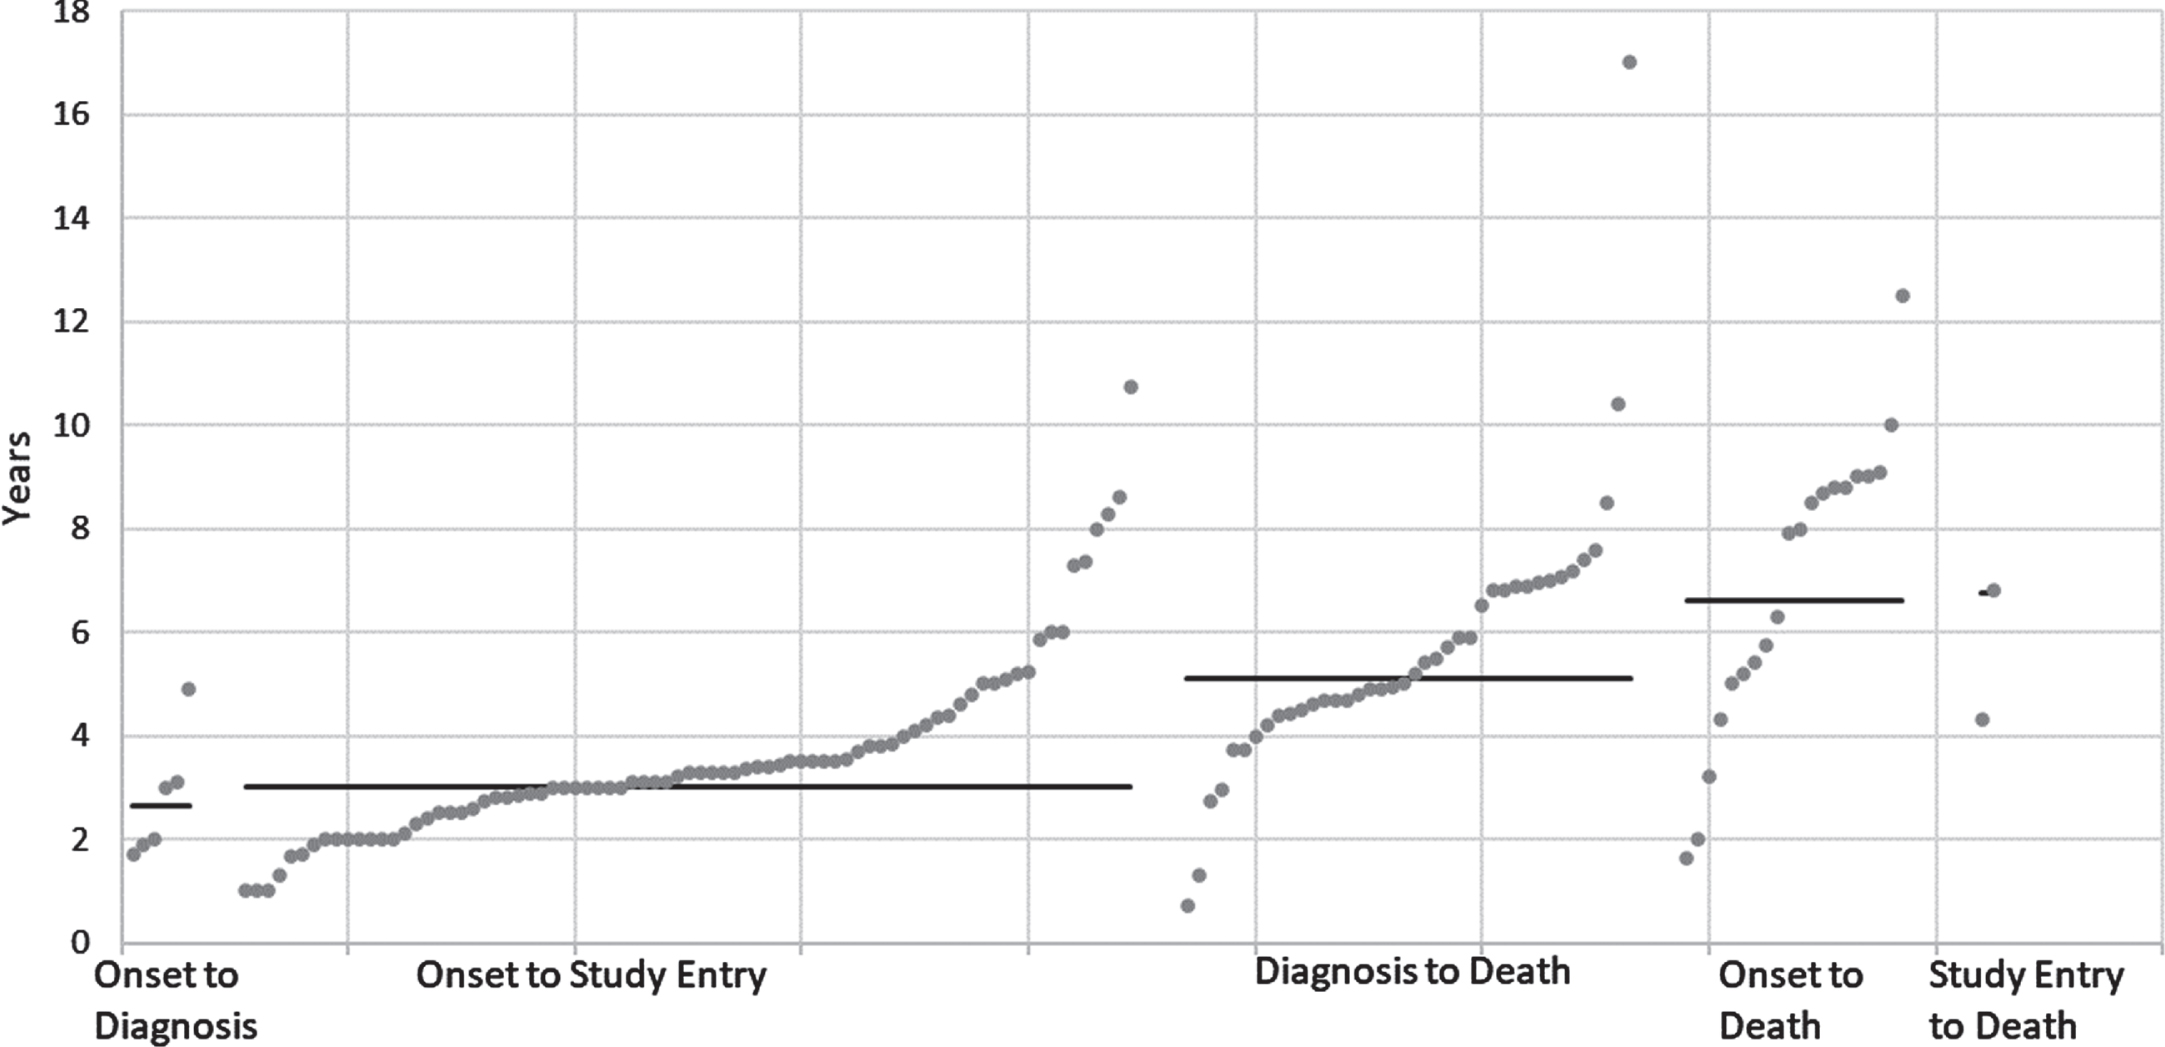 Total disease duration estimates in years (grey dots) with weighted average (black line, weighed by sample size) by duration definition.